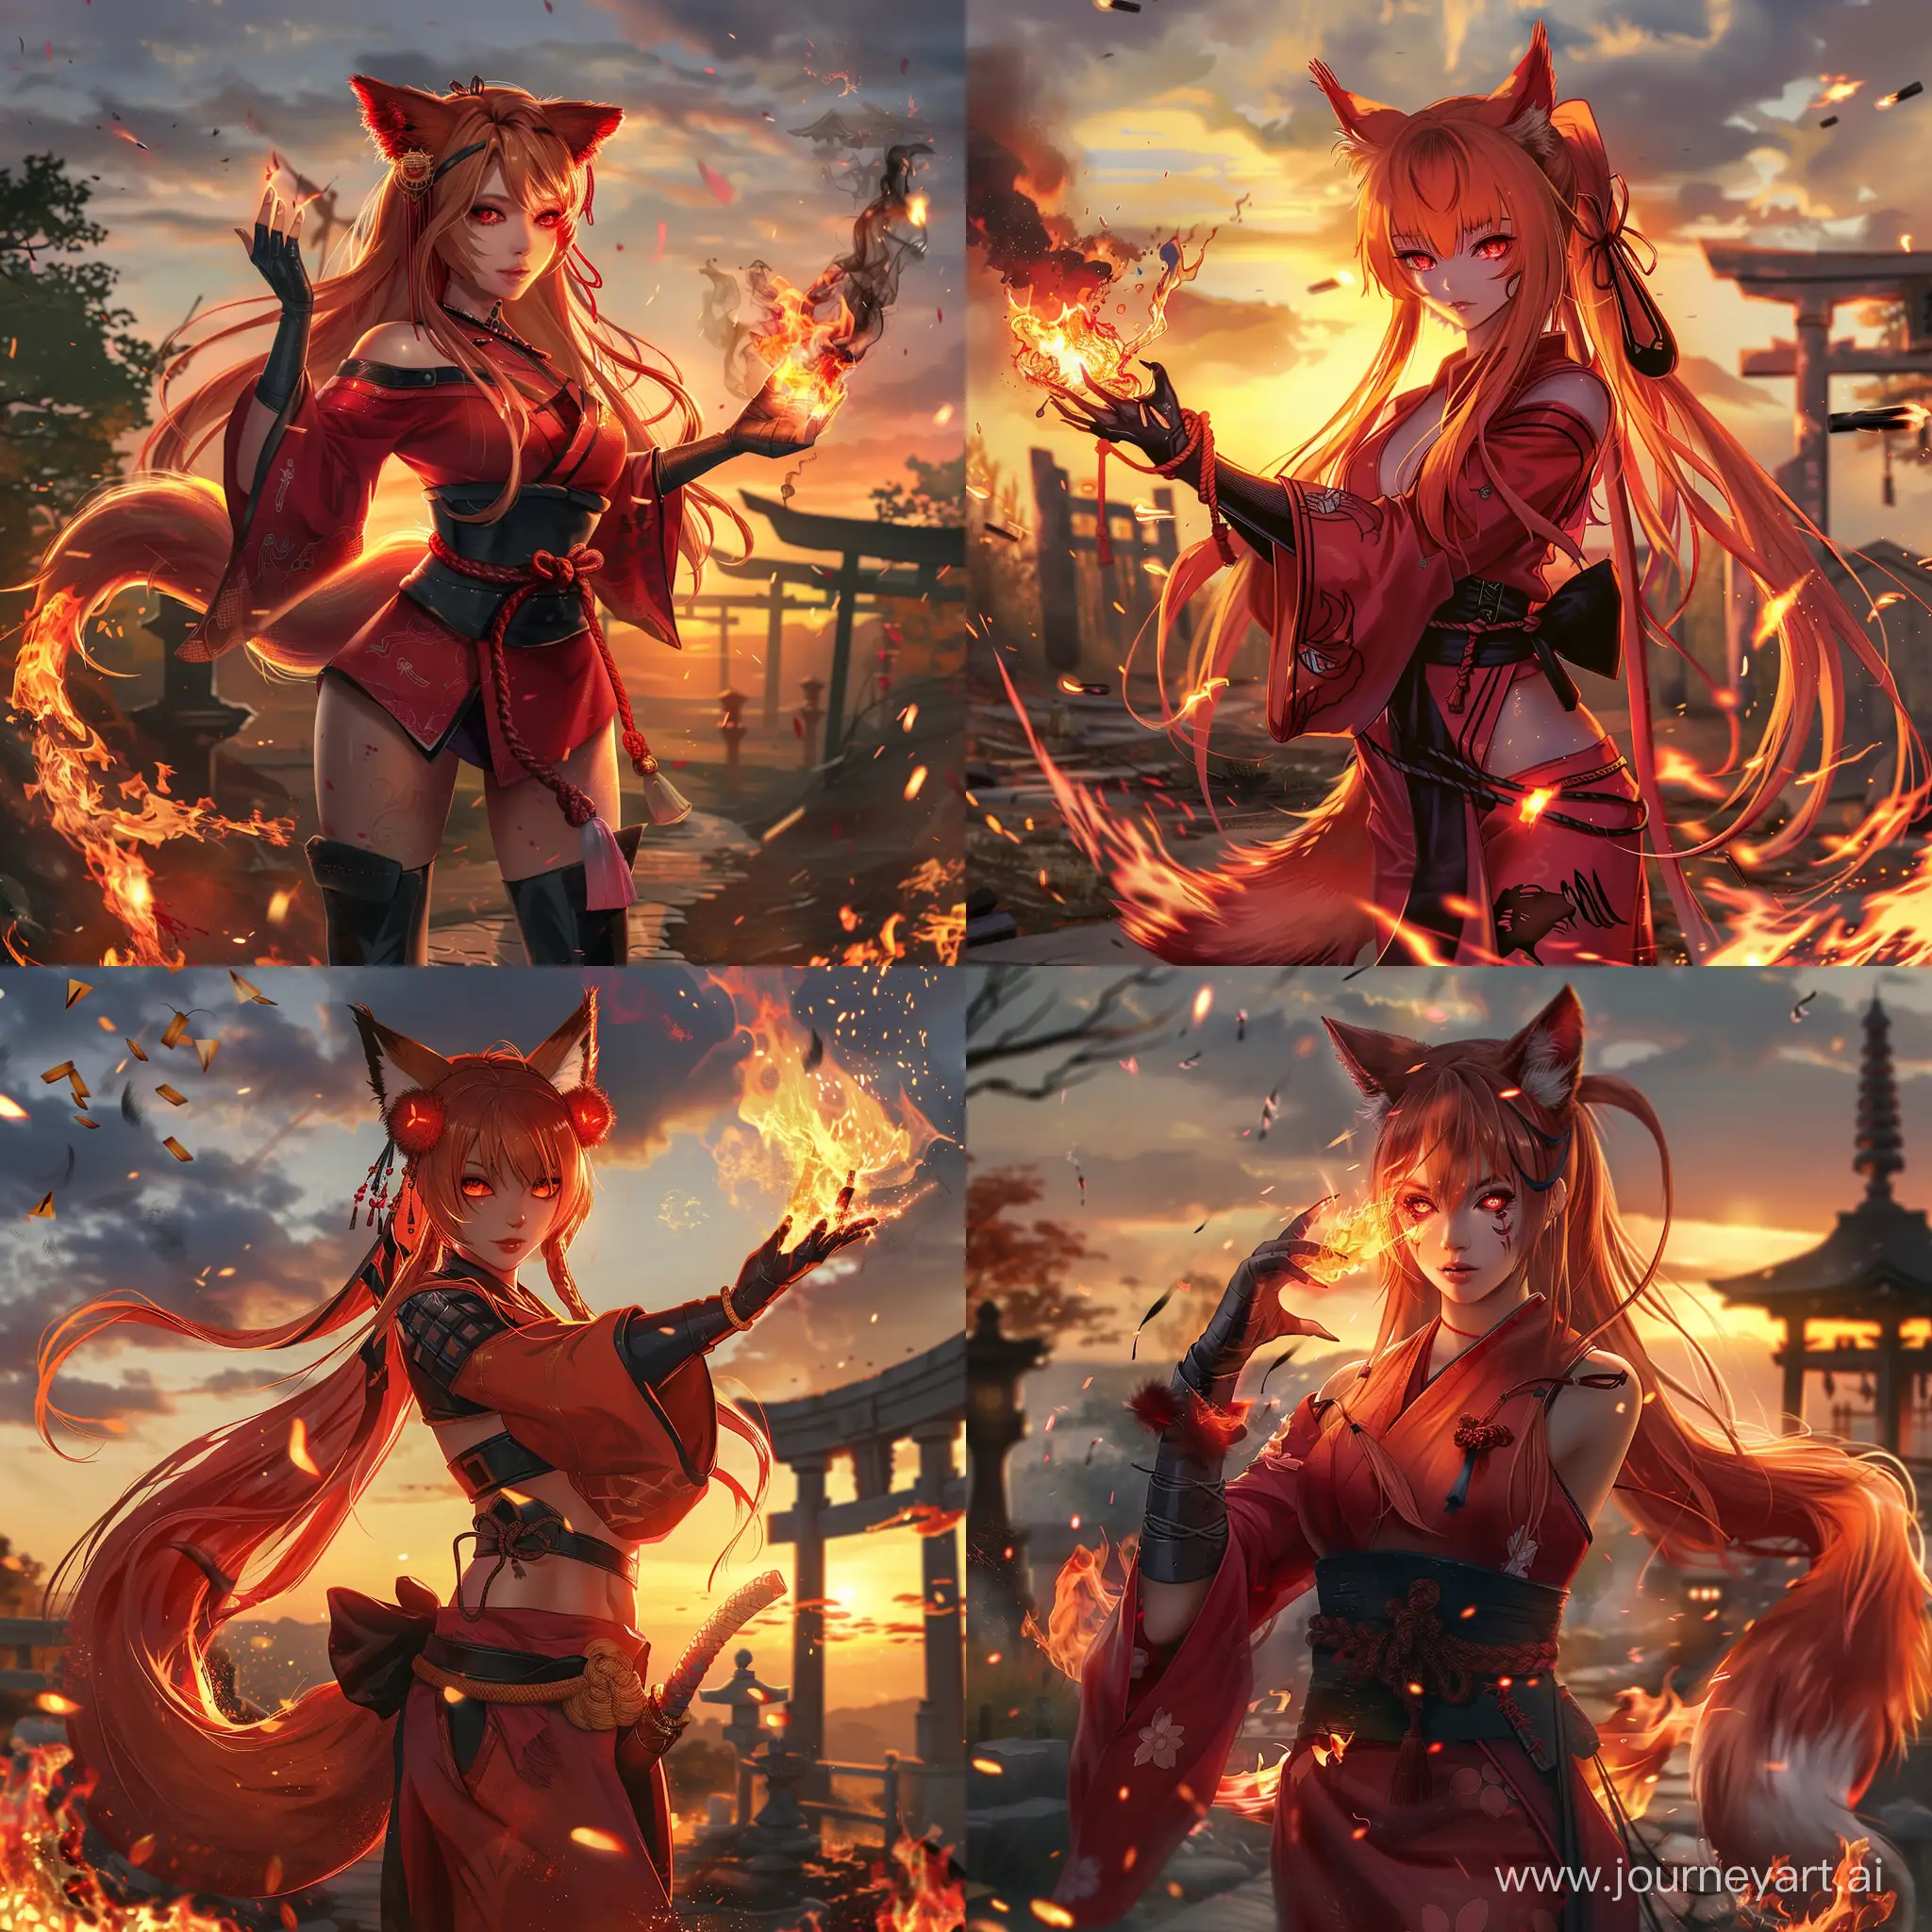 Fiery-Red-Fox-Girl-Practicing-Martial-Arts-at-Sunset-by-Shinto-Shrine